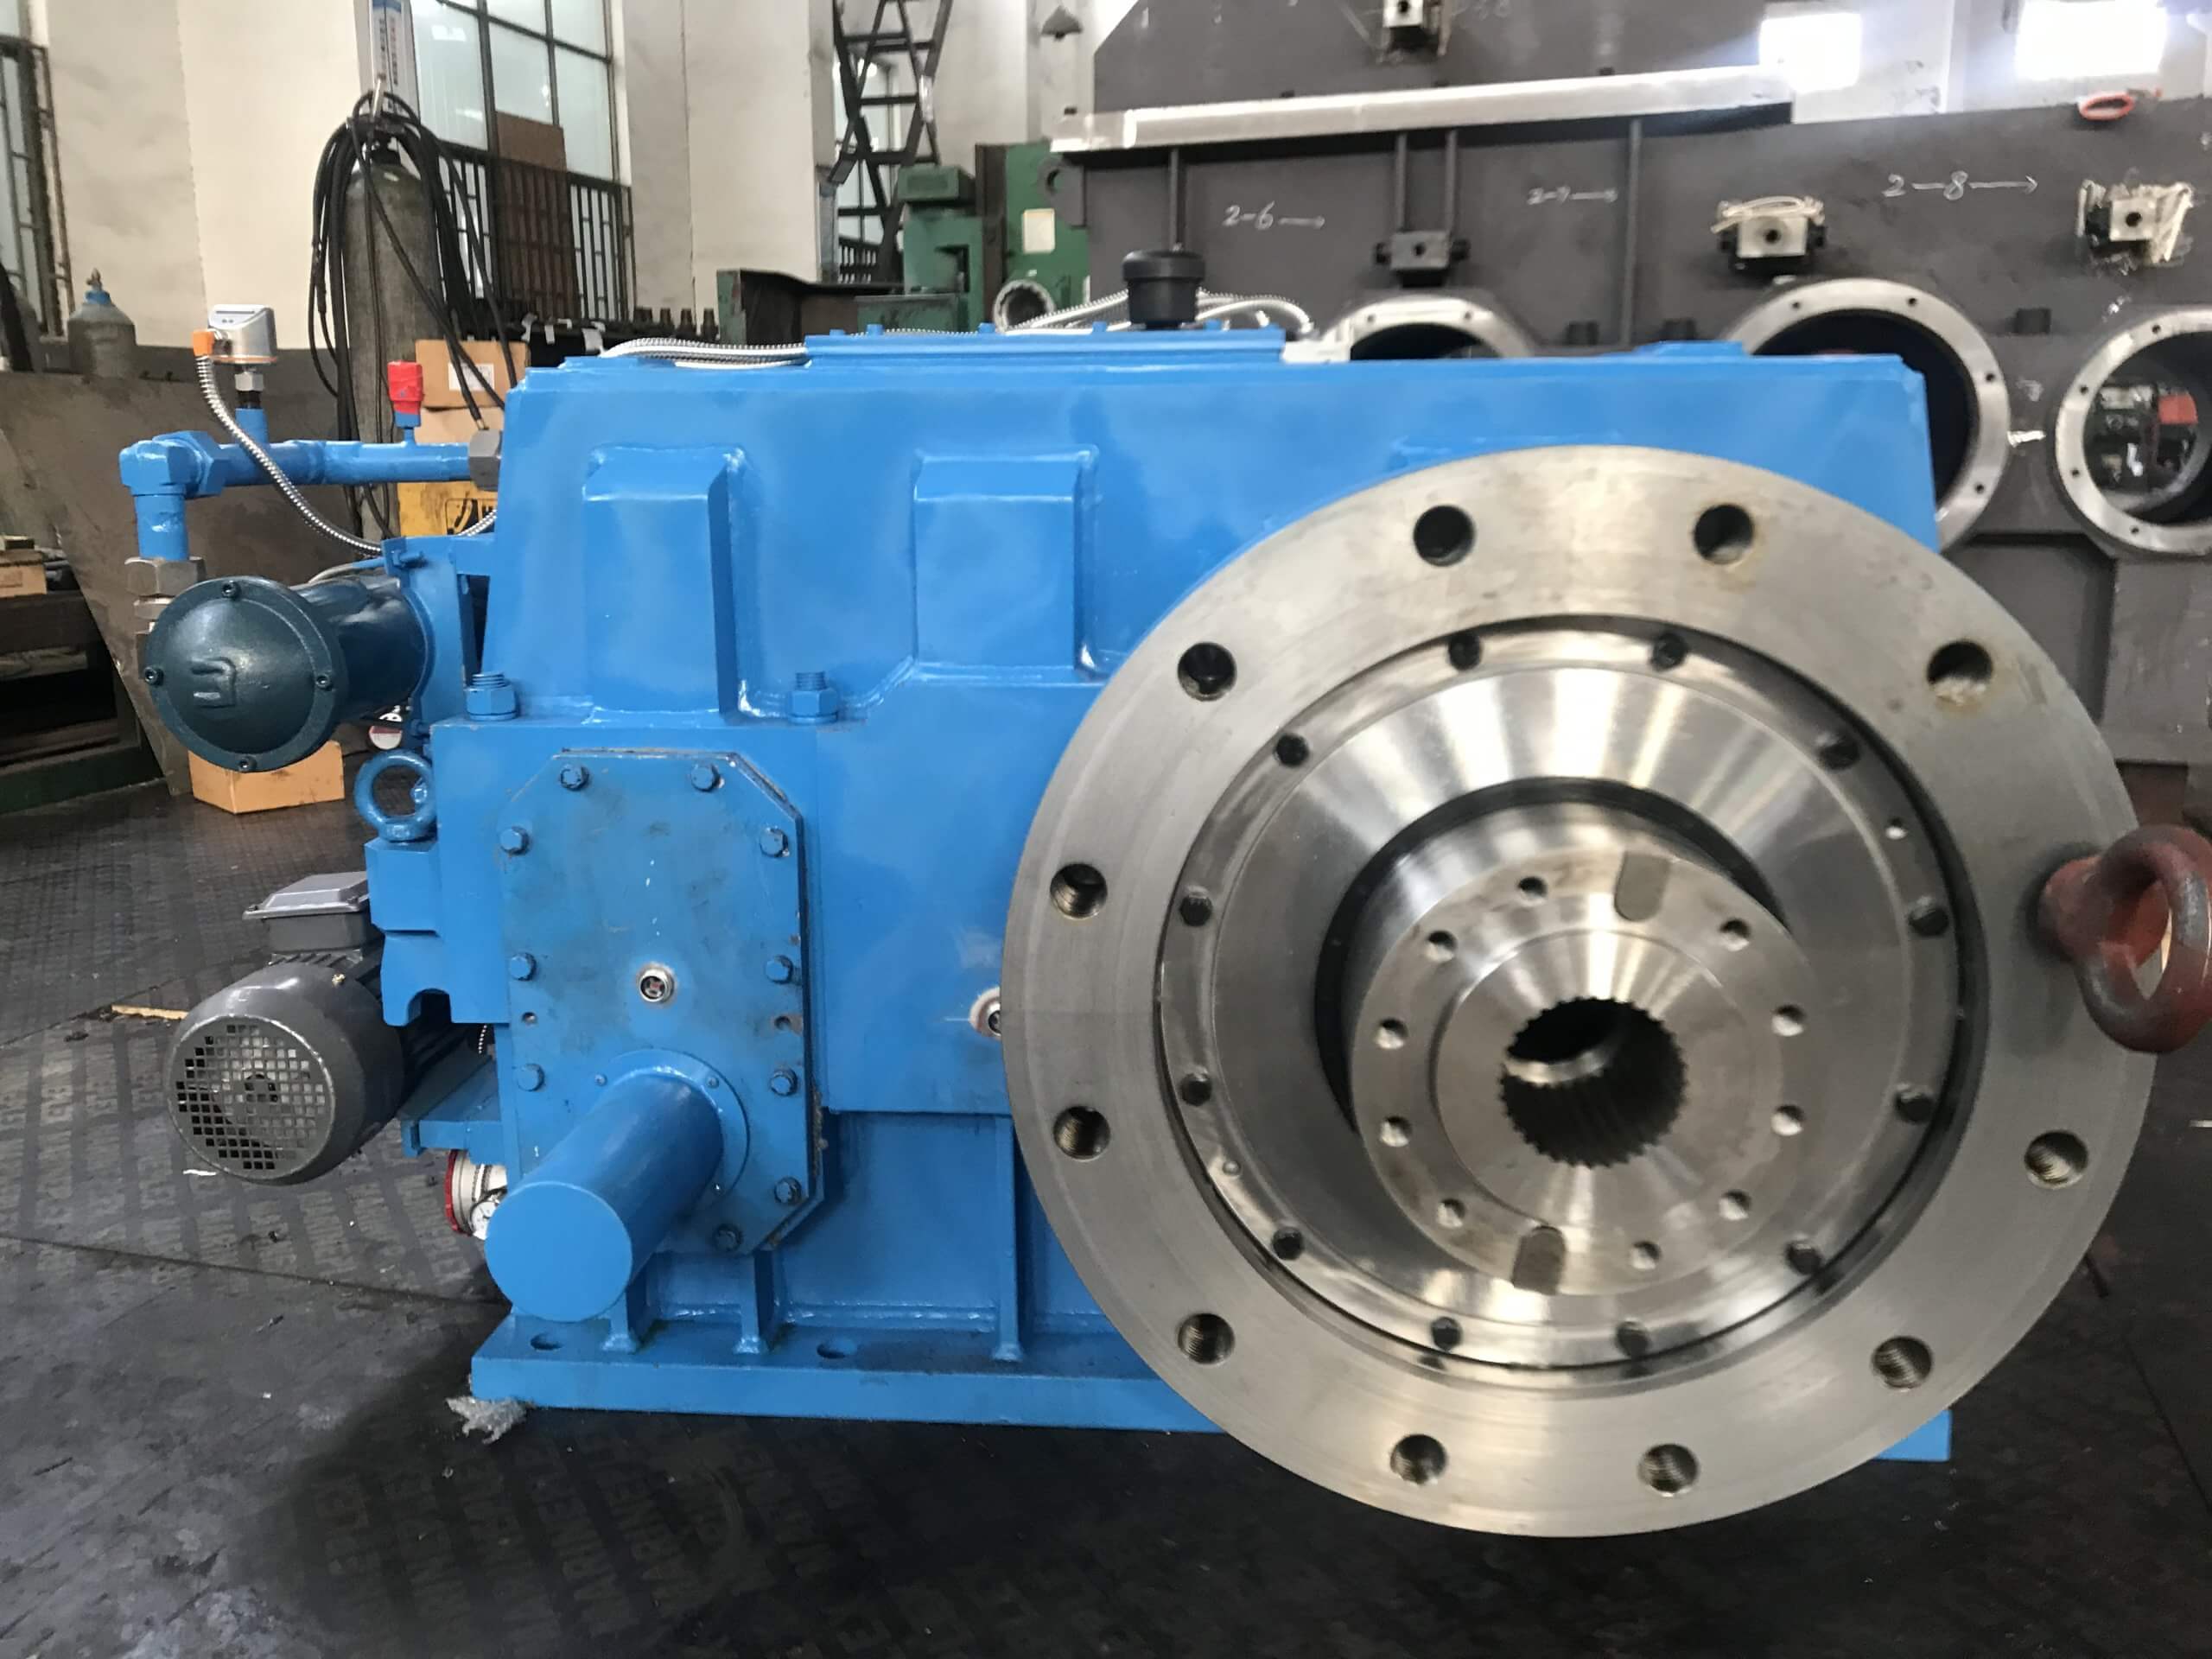 The first Gearbox in 2020 - Kngear®